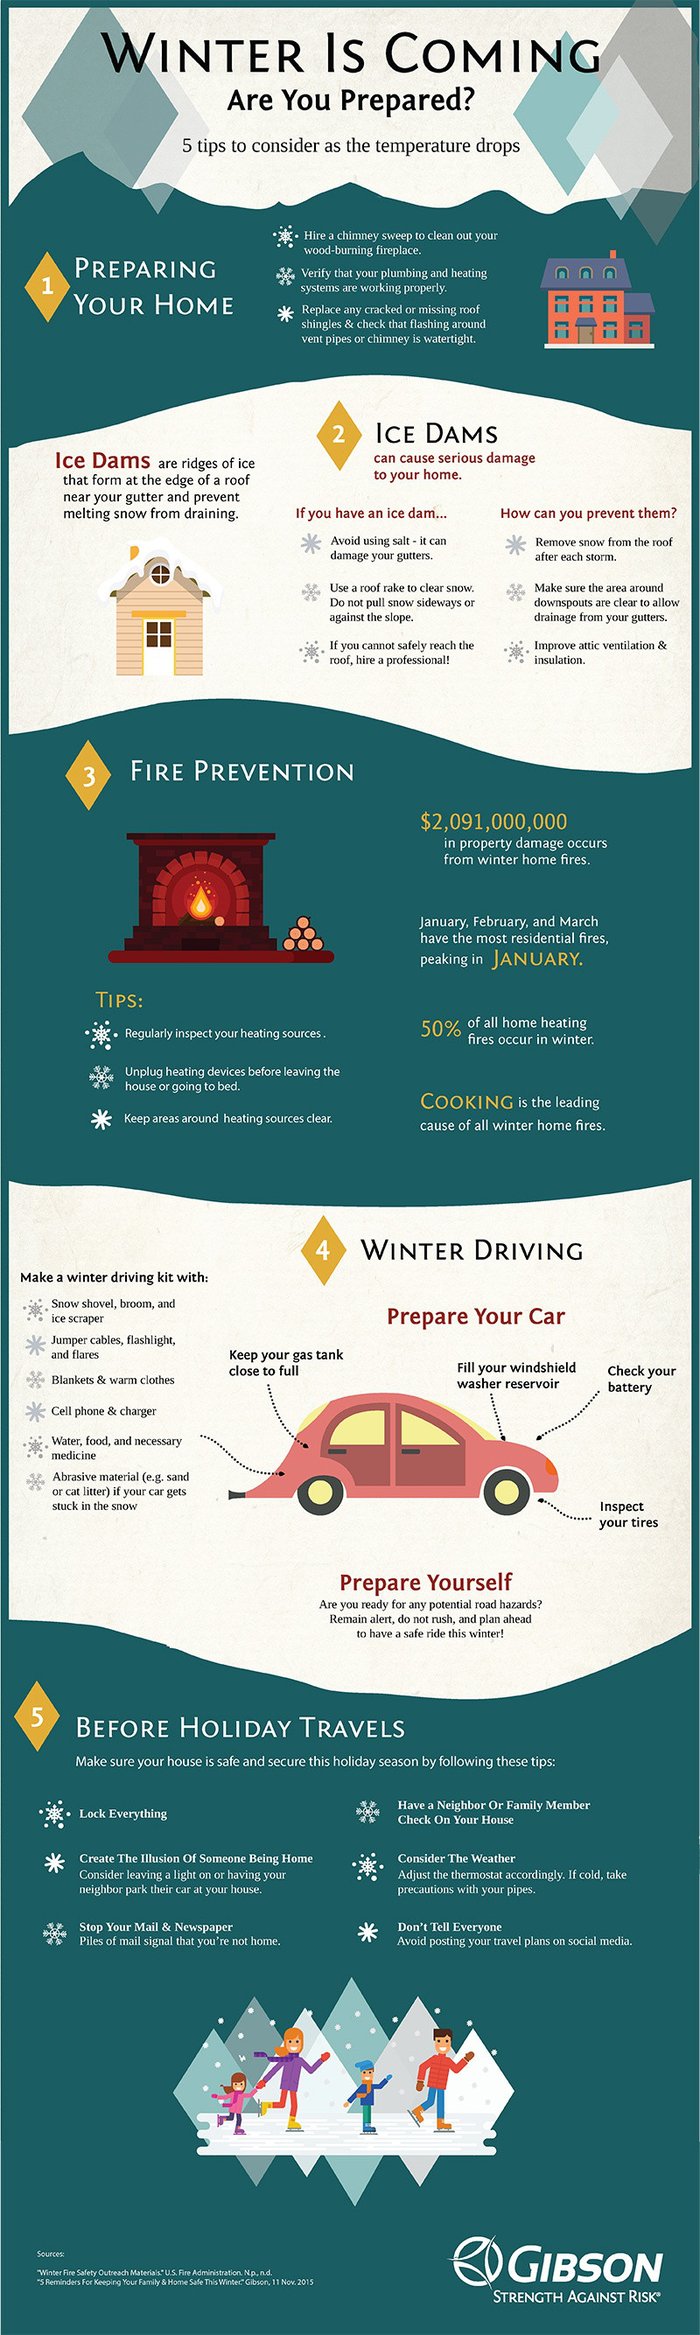 Winter_Is_Coming_-_Infographic_-_small-1.jpg